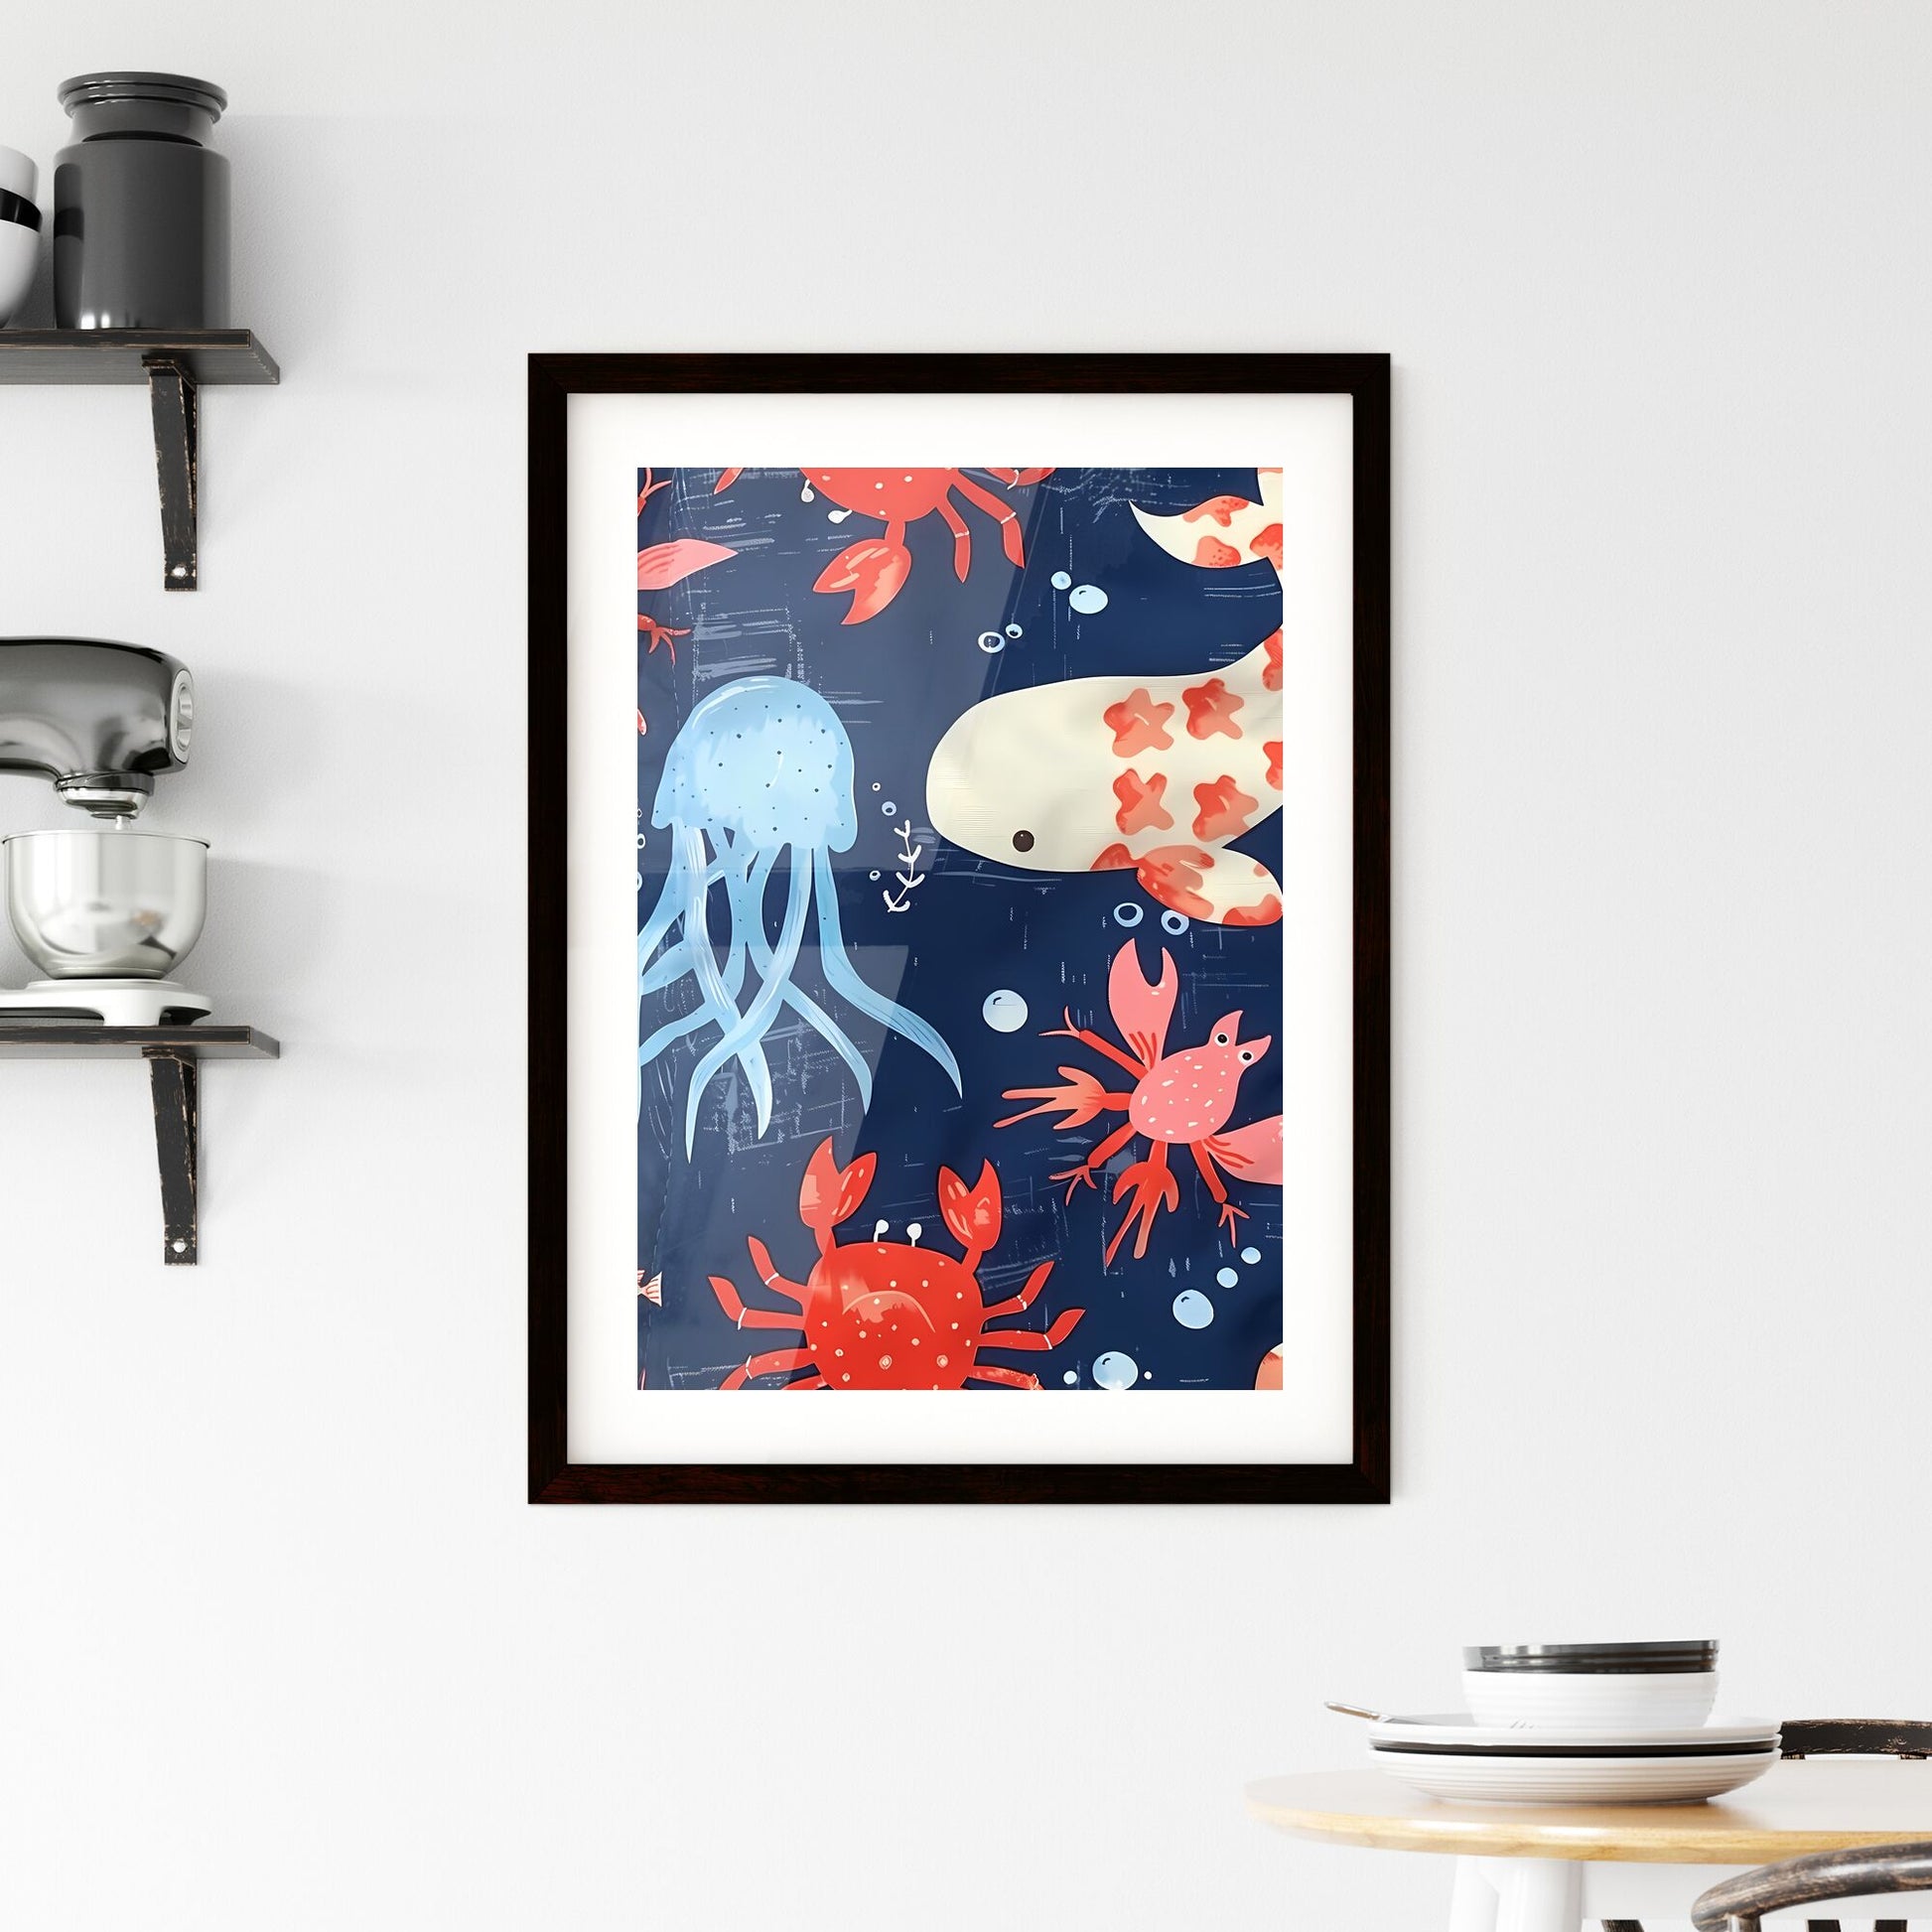 Vibrant Turquoise Marine Life Fabric Print: Playful Red and White Fish and Crabs on Blue Canvas with White Jellyfish Patterns Default Title